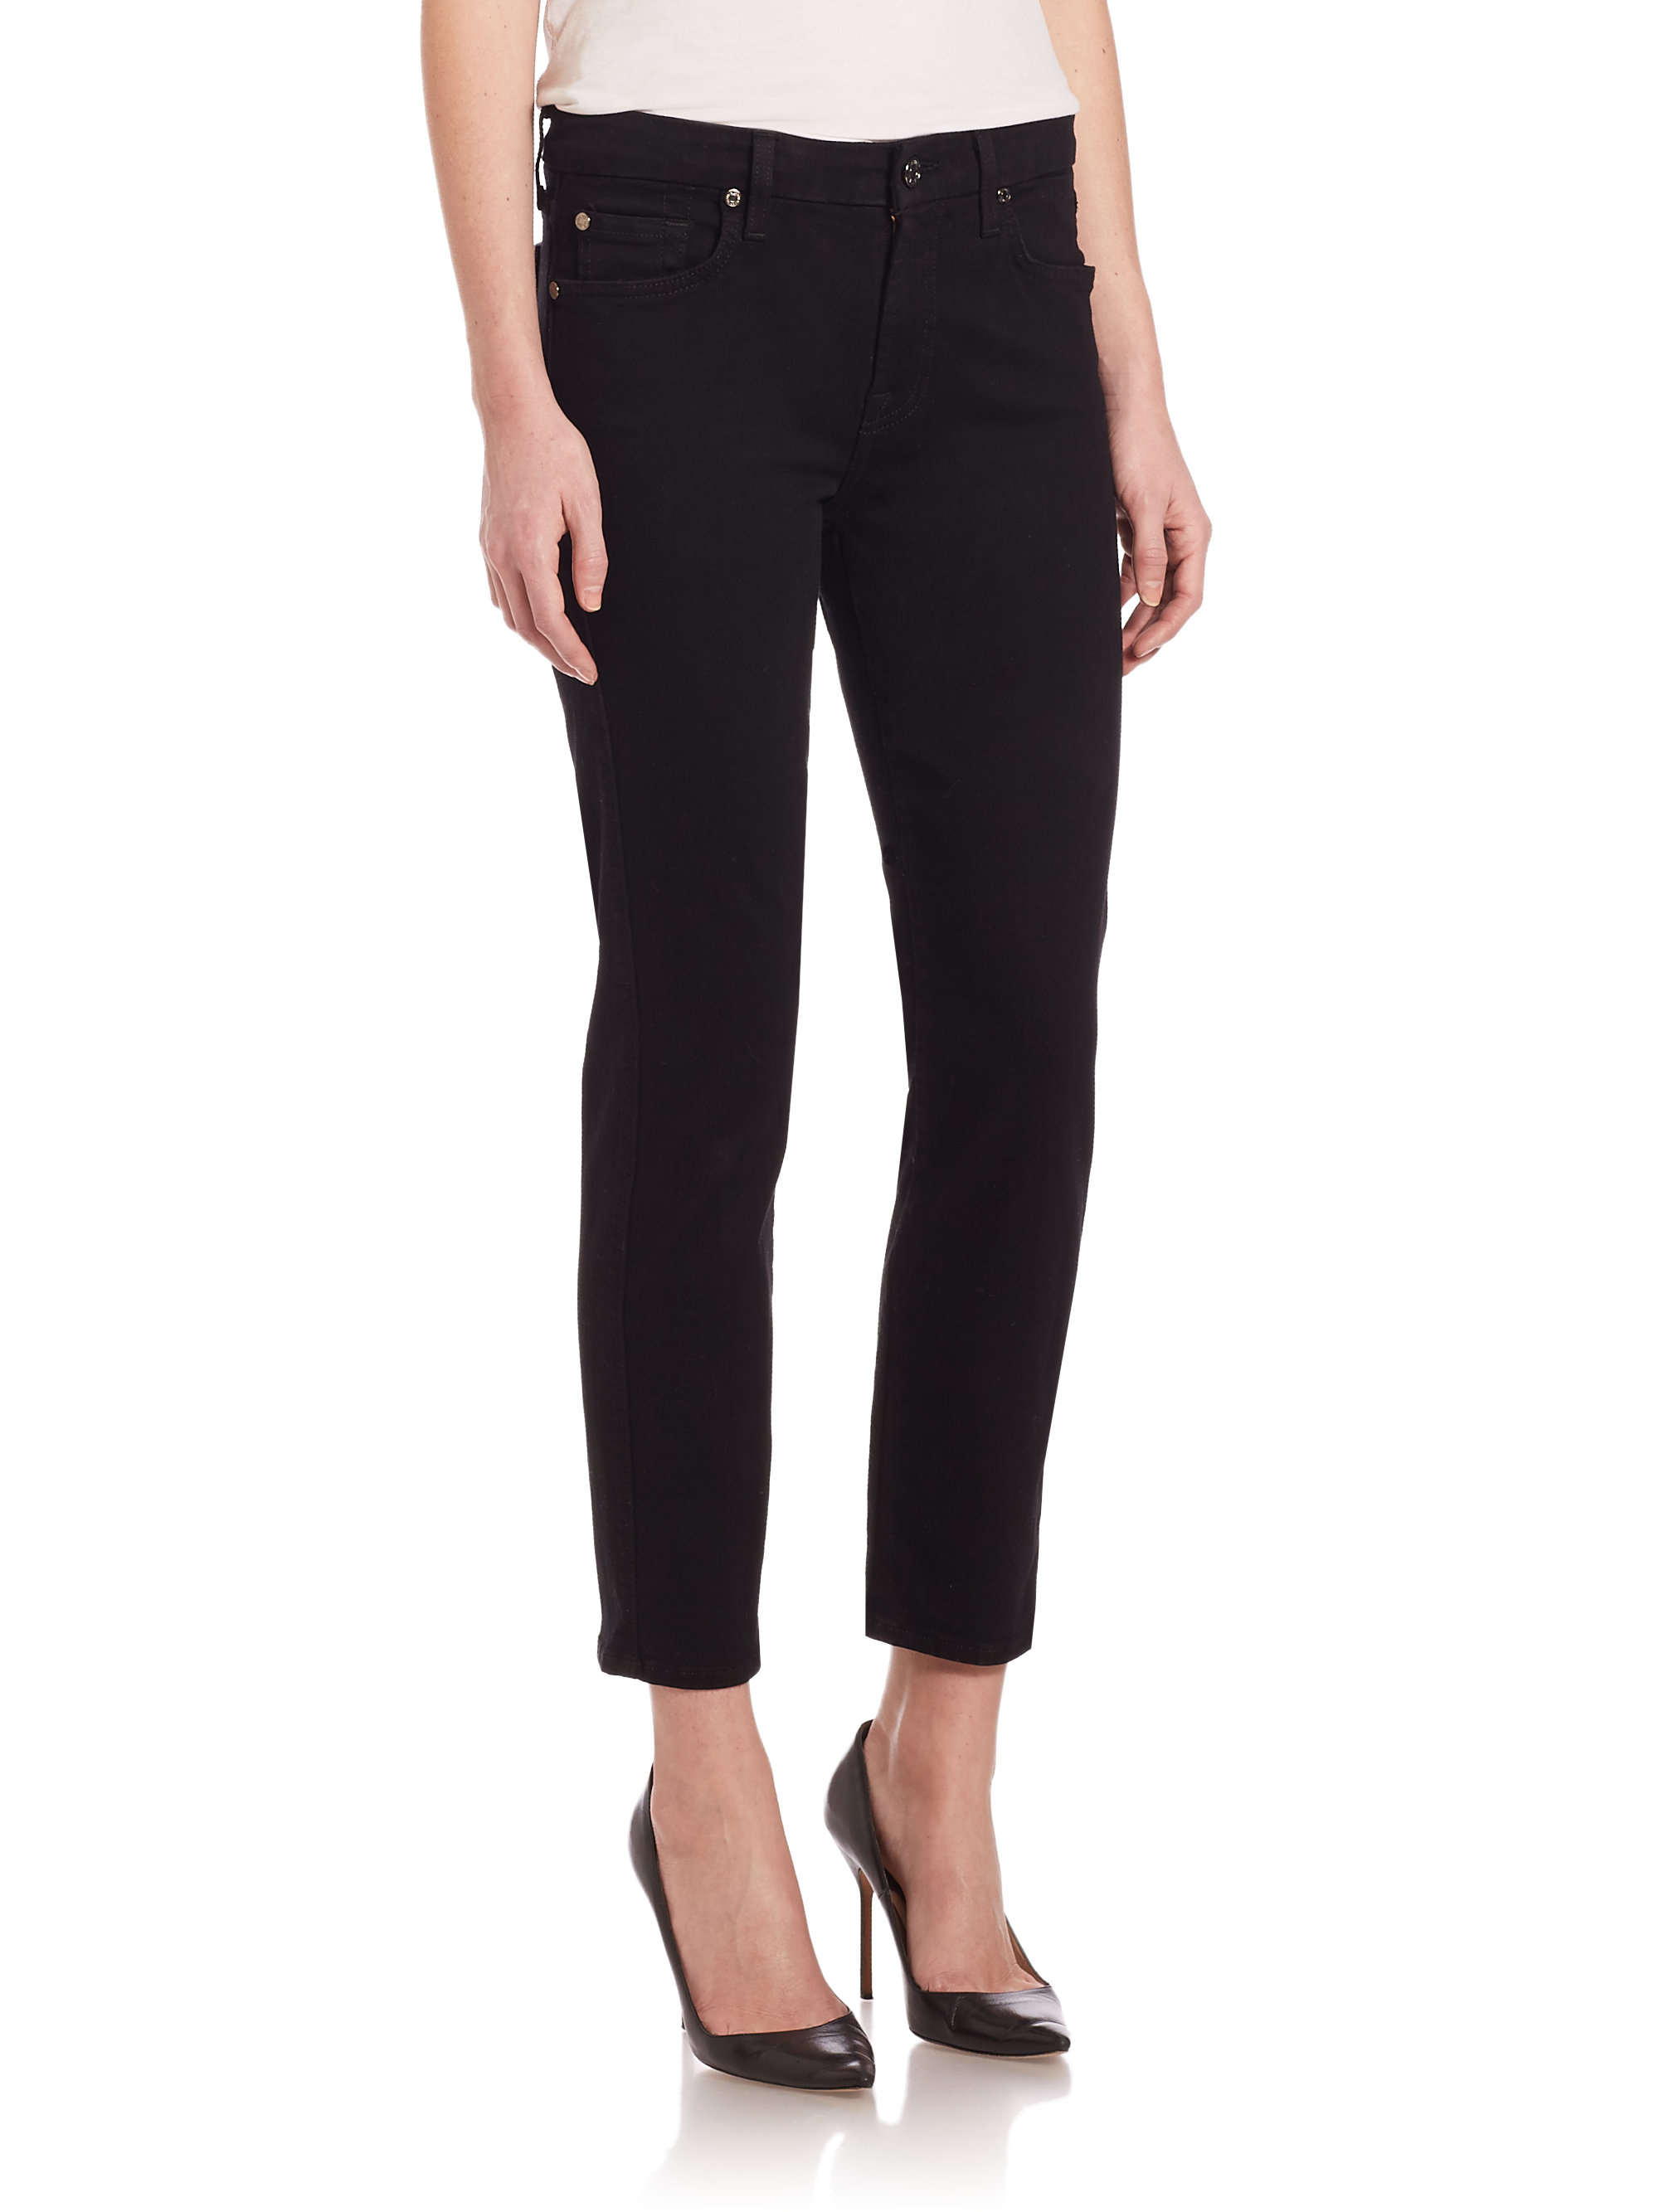 Lyst - 7 For All Mankind Kimmie Cropped Slim Illusion Skinny Jeans in Black